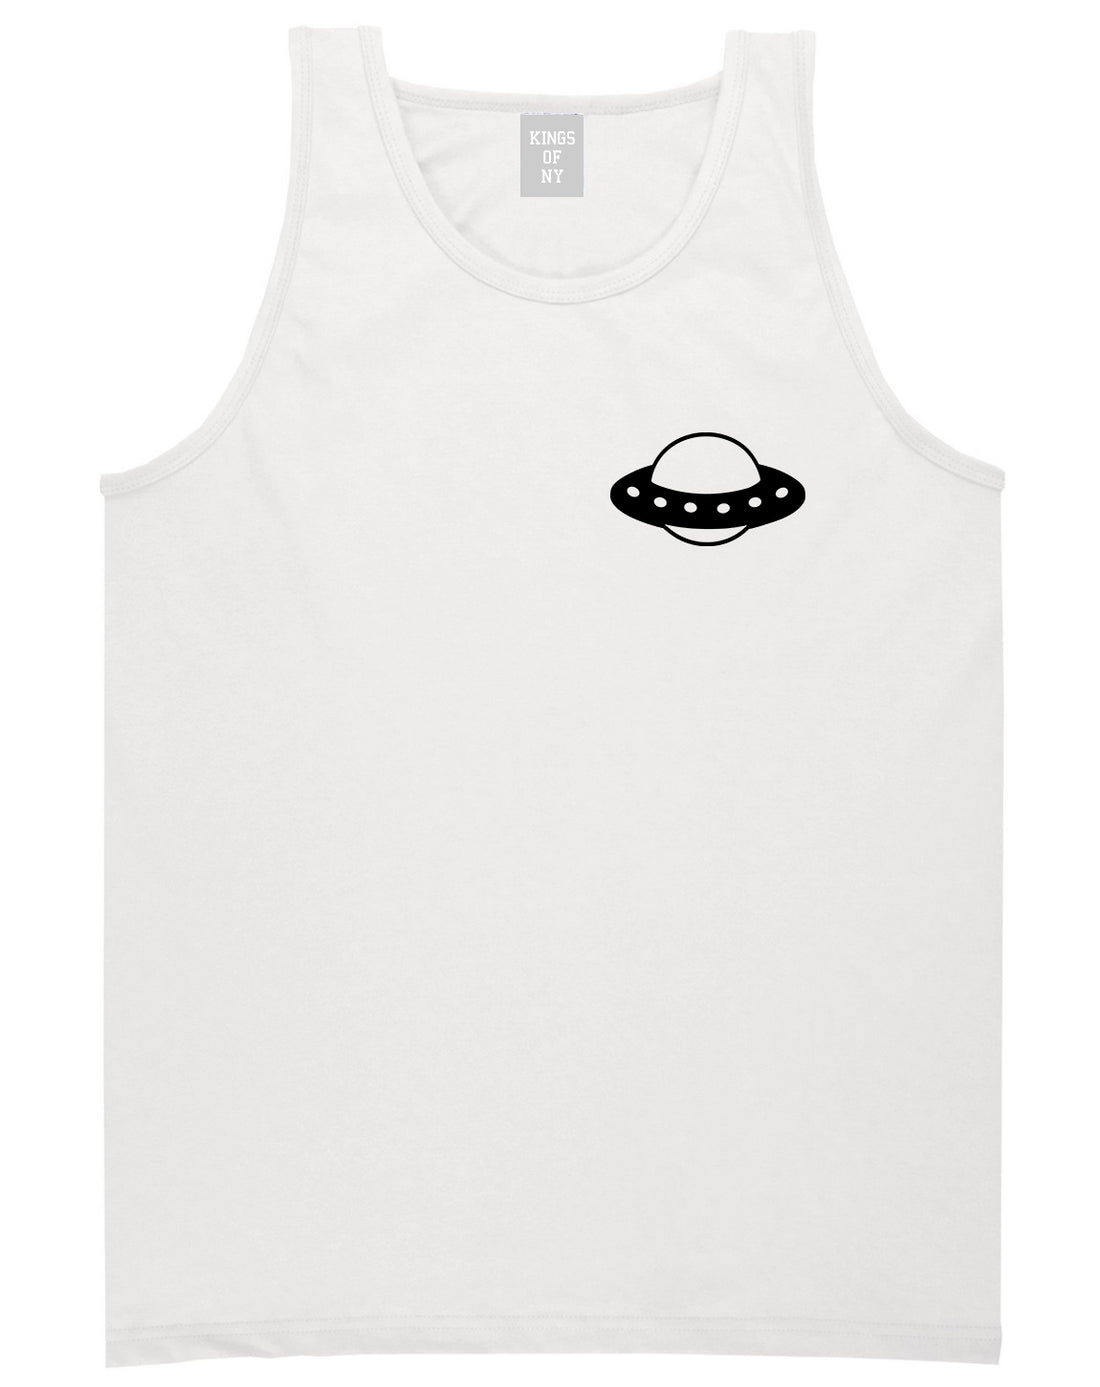 Spaceship_Chest Mens White Tank Top Shirt by Kings Of NY